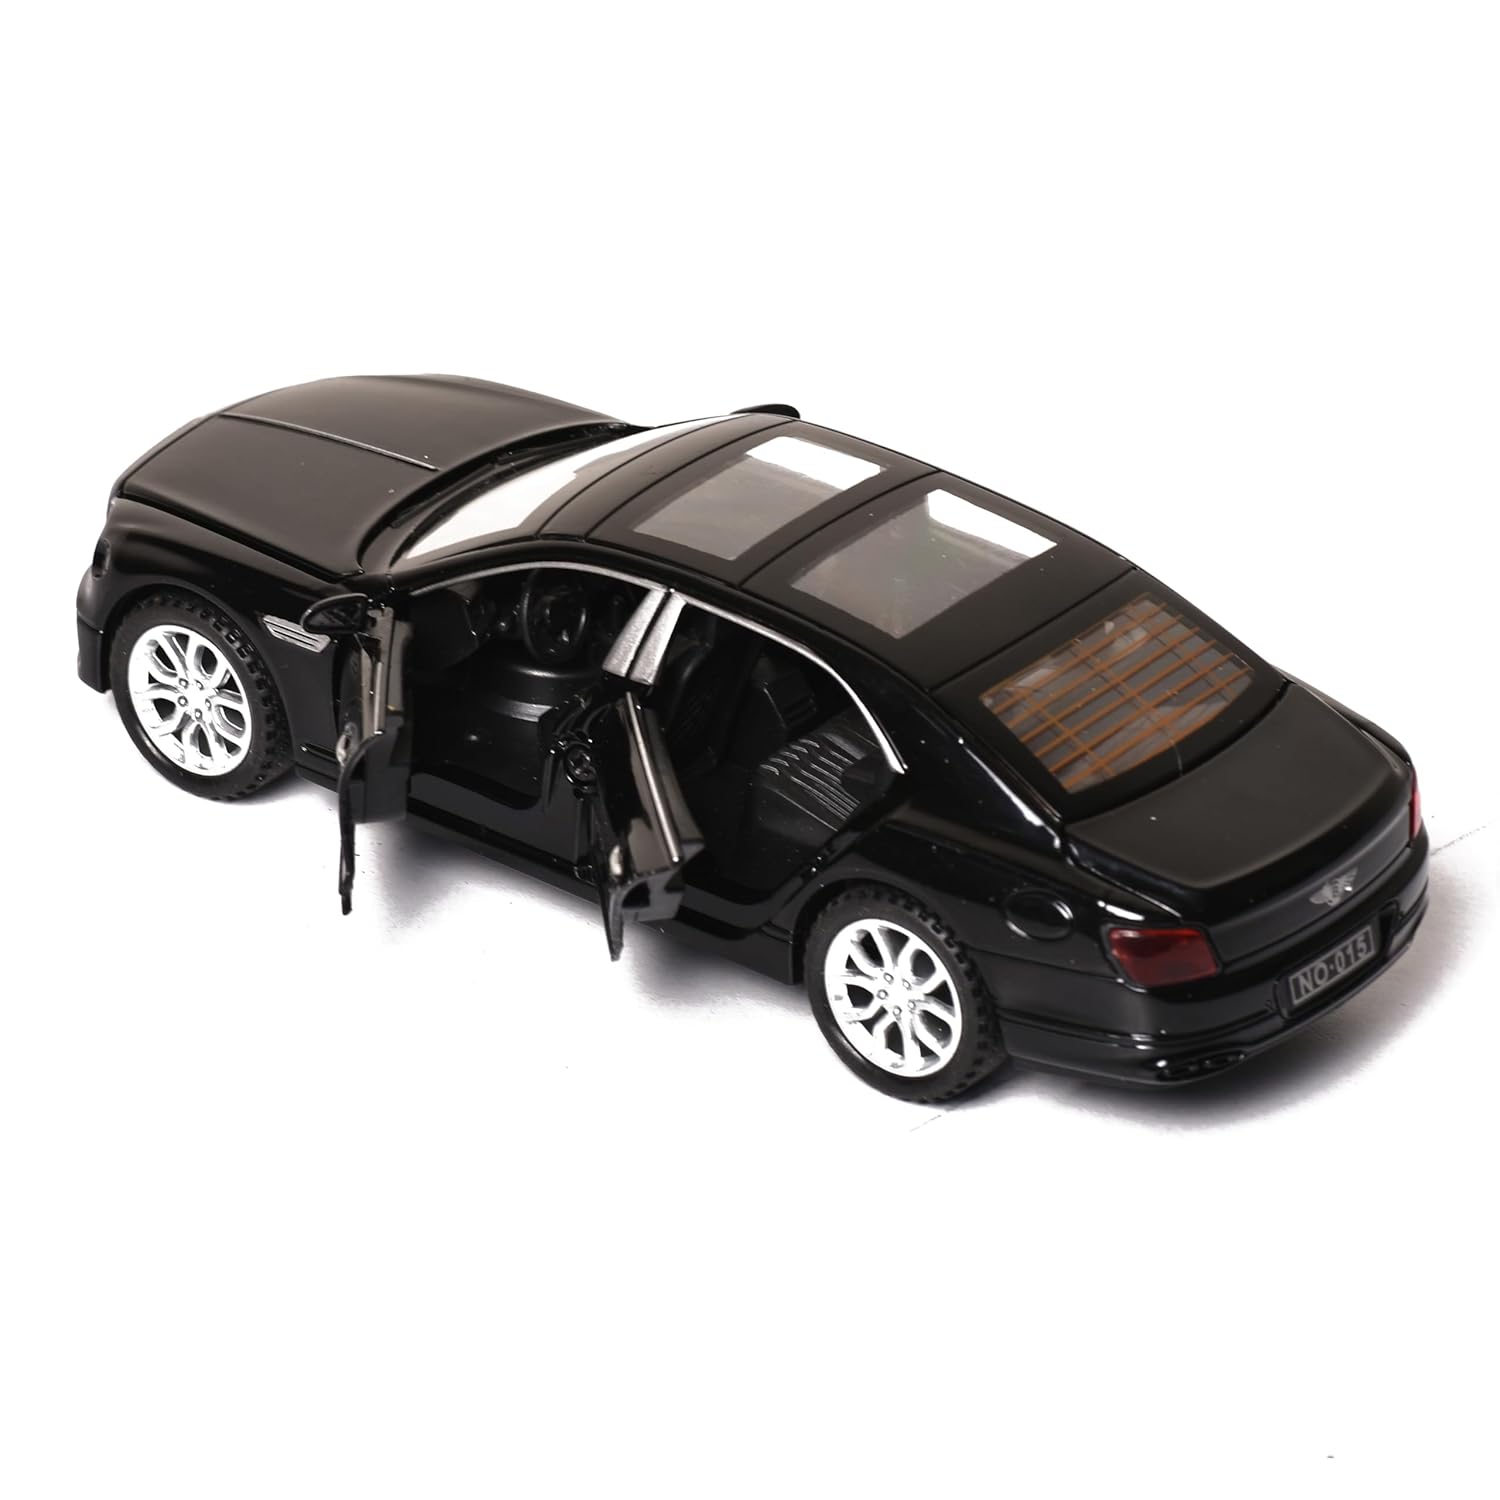 Braintastic Bentley Diecast Alloy Model Car Pull Back Collectible Toy Vehicles with Sound and Light Door Opened for Kids Age 3+ Years Black